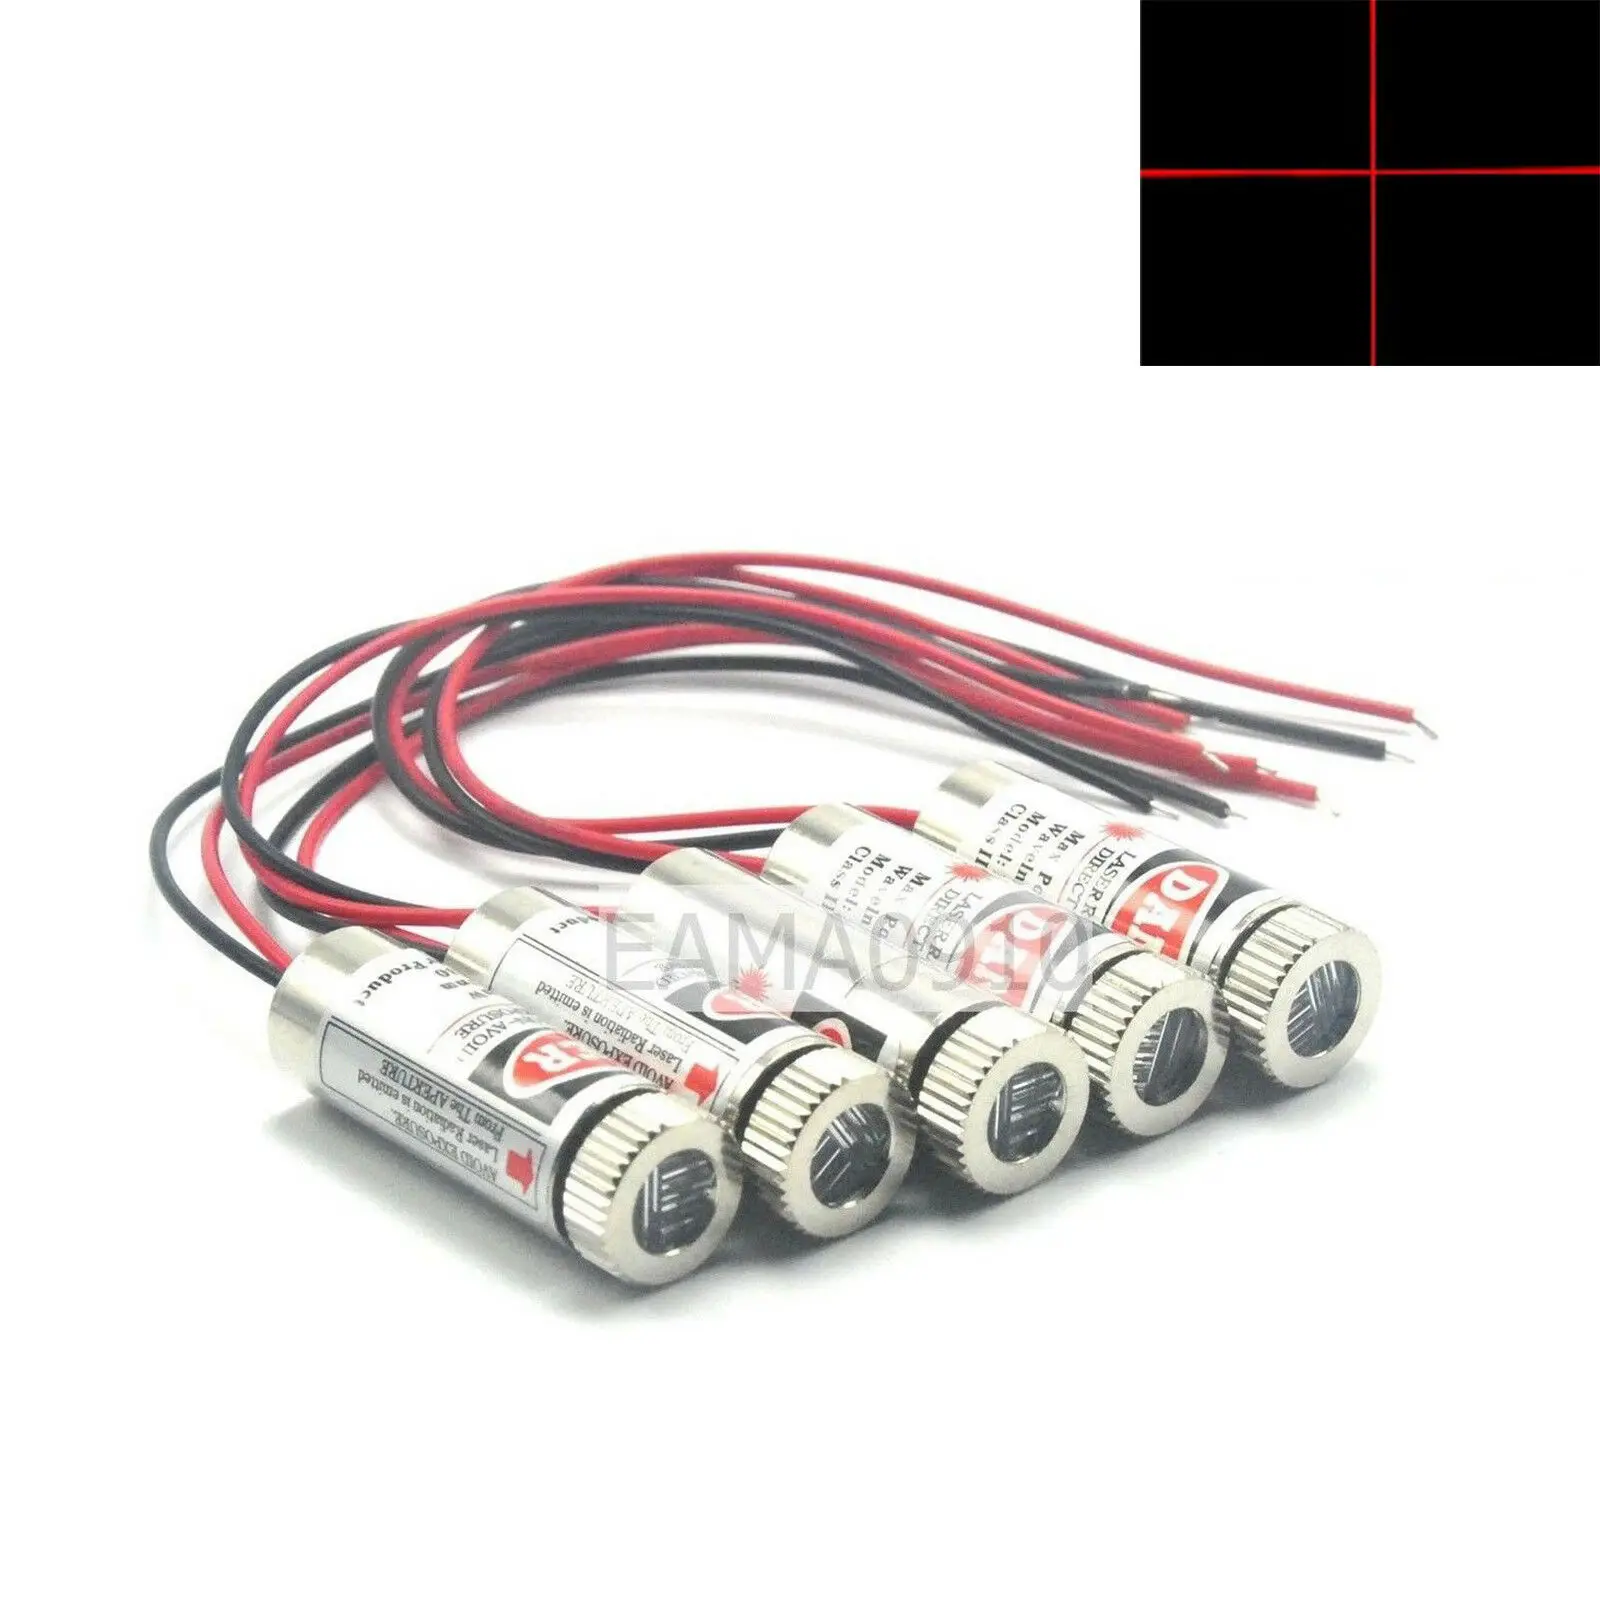 5pcs Focusable 3-5V 650nm 5mW Red Laser Cross Diode Module 12x35mm w/Driver-in 650nm 5mw dot 3 5v 12x35mm focusable red laser module diode w driver in